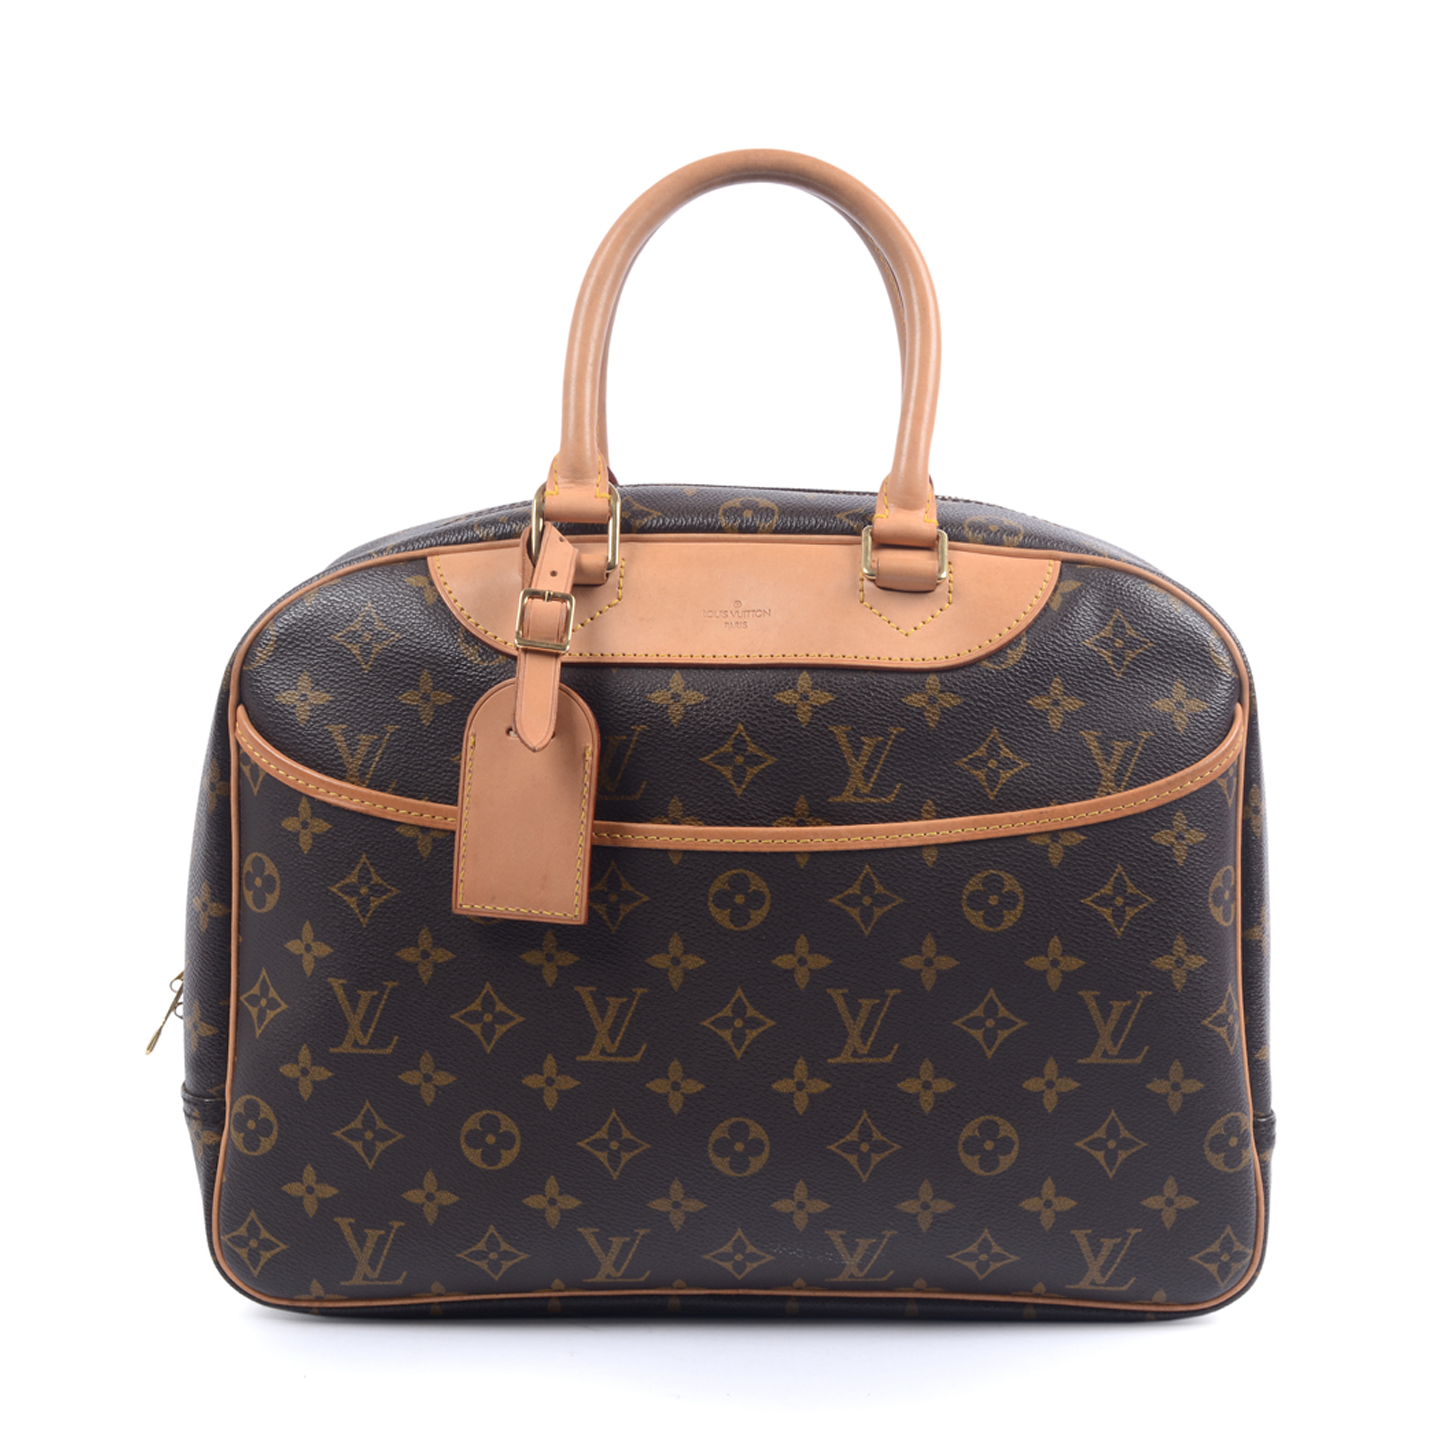 Louis Vuitton Deauville Travel Bag | Confederated Tribes of the Umatilla Indian Reservation